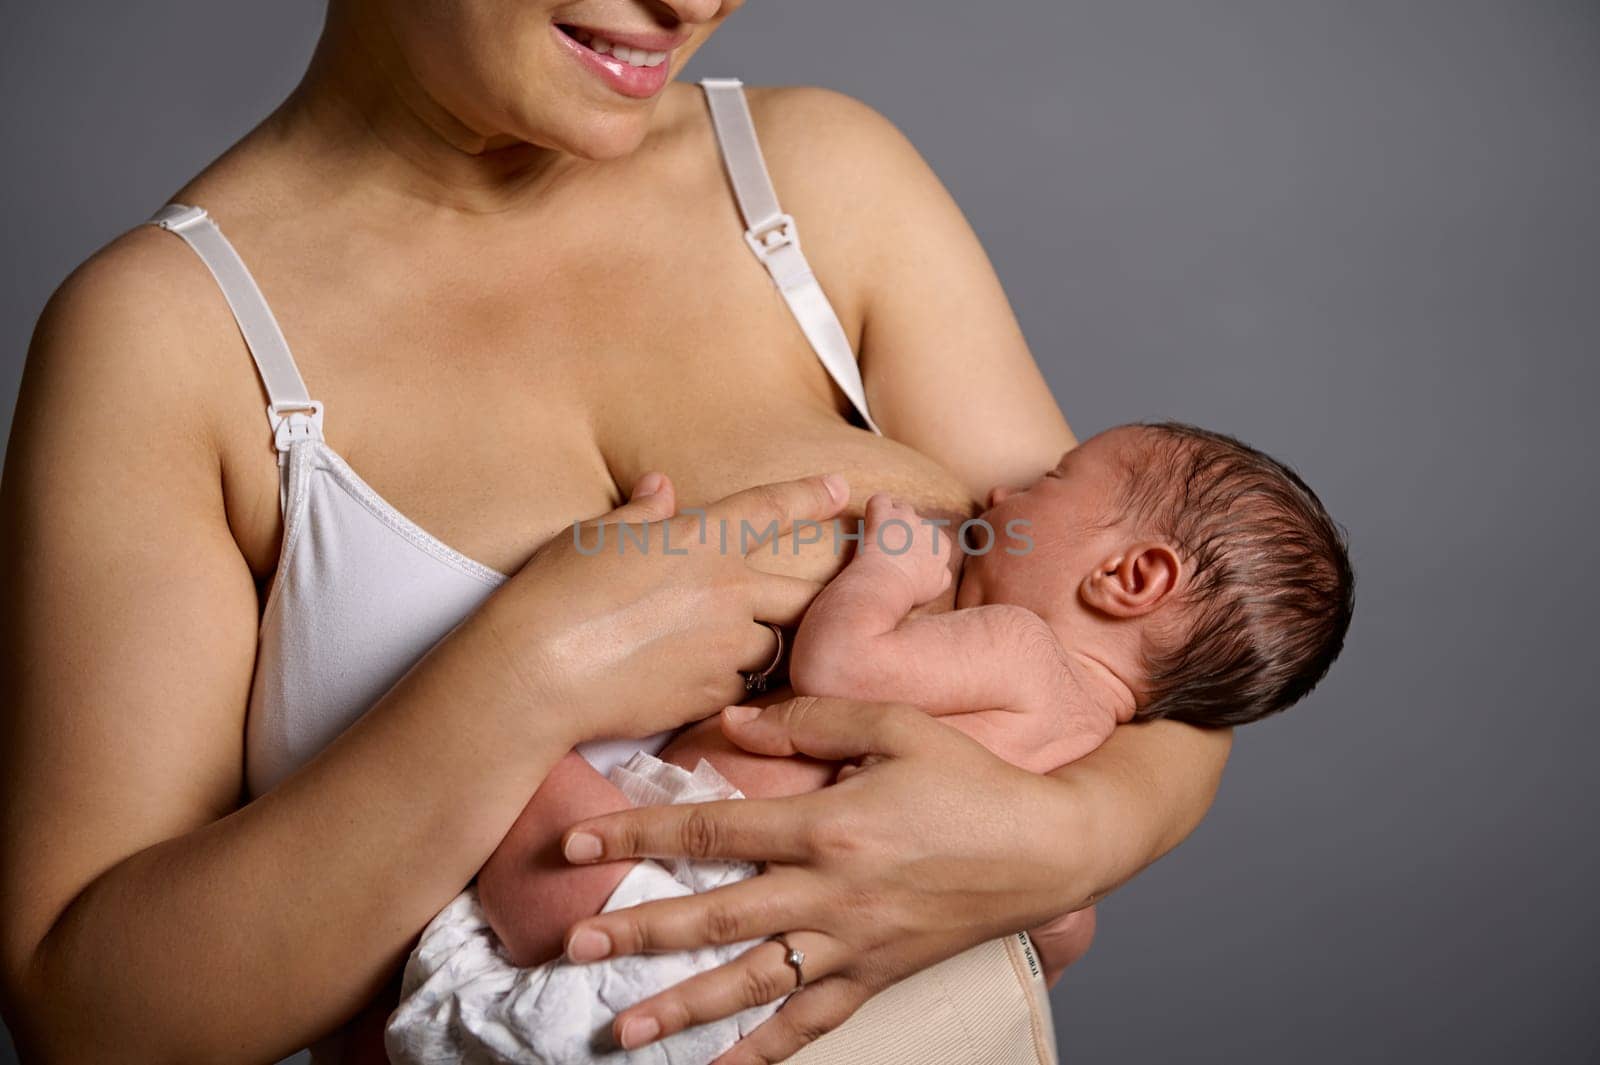 Cropped view of young smiling new mother feeding her newborn baby with breast milk, for healthy growth, gray studio background. Copy ad space, dressed in underwear and elastic bandage after c-section